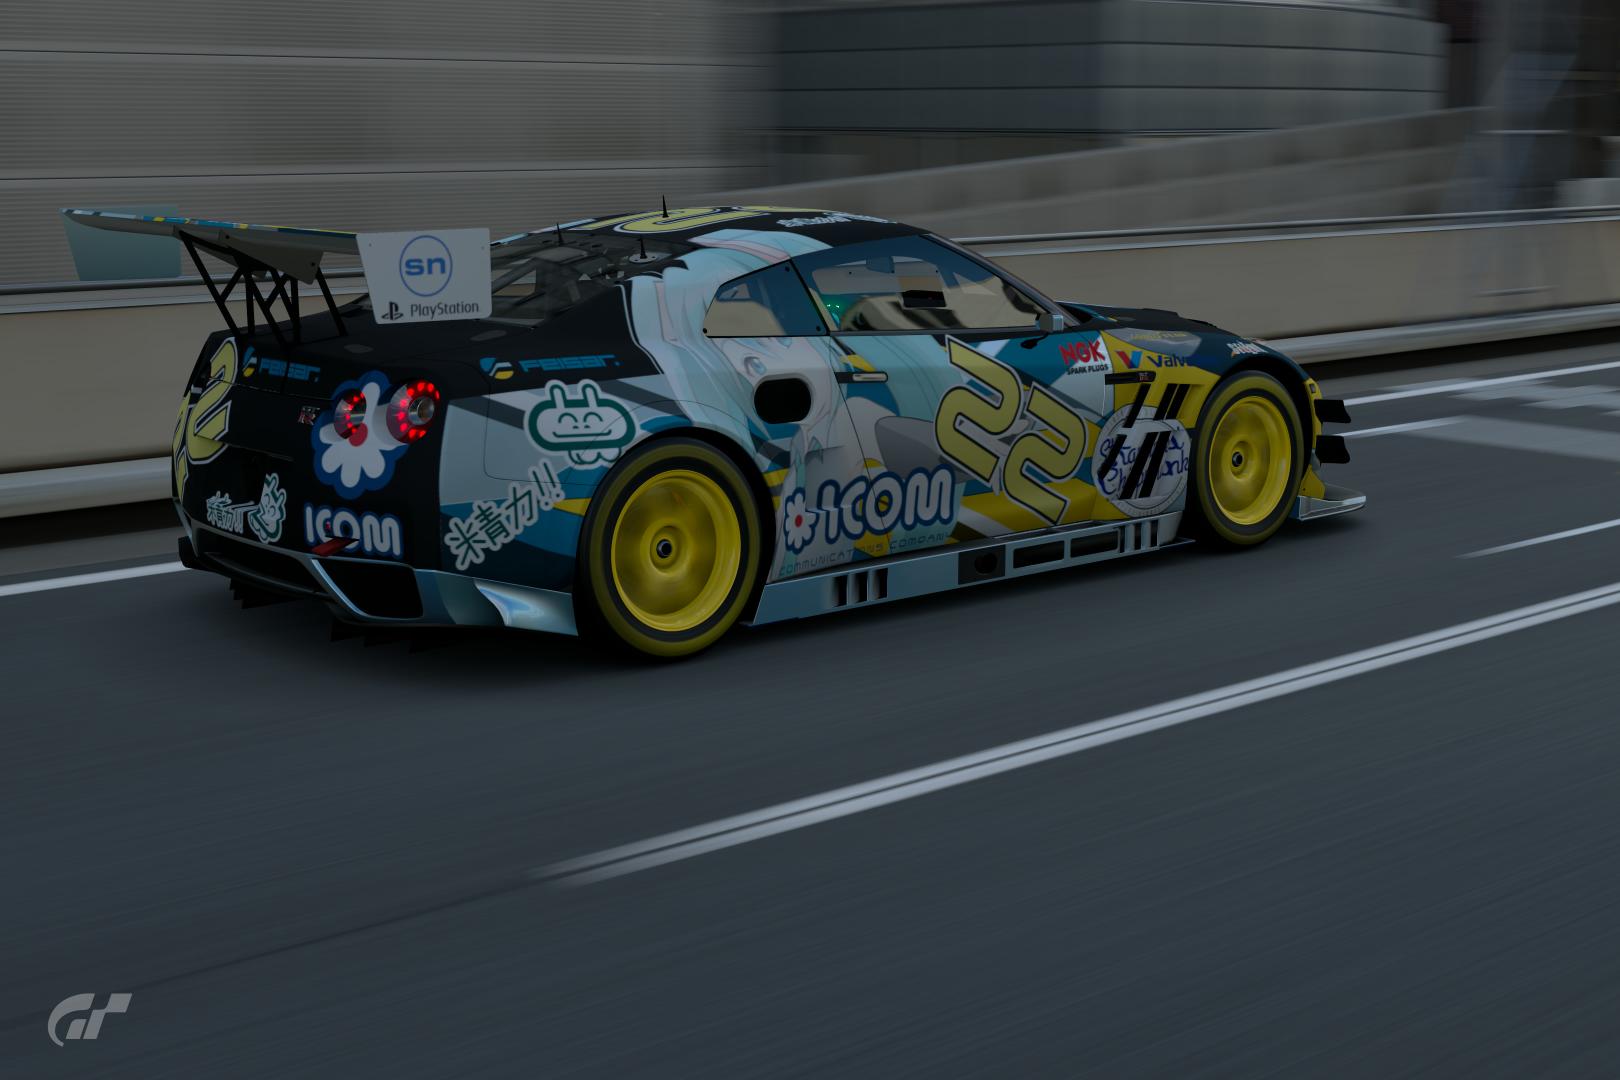 Schultze GT-R GT3 in fictitious Feisar livery